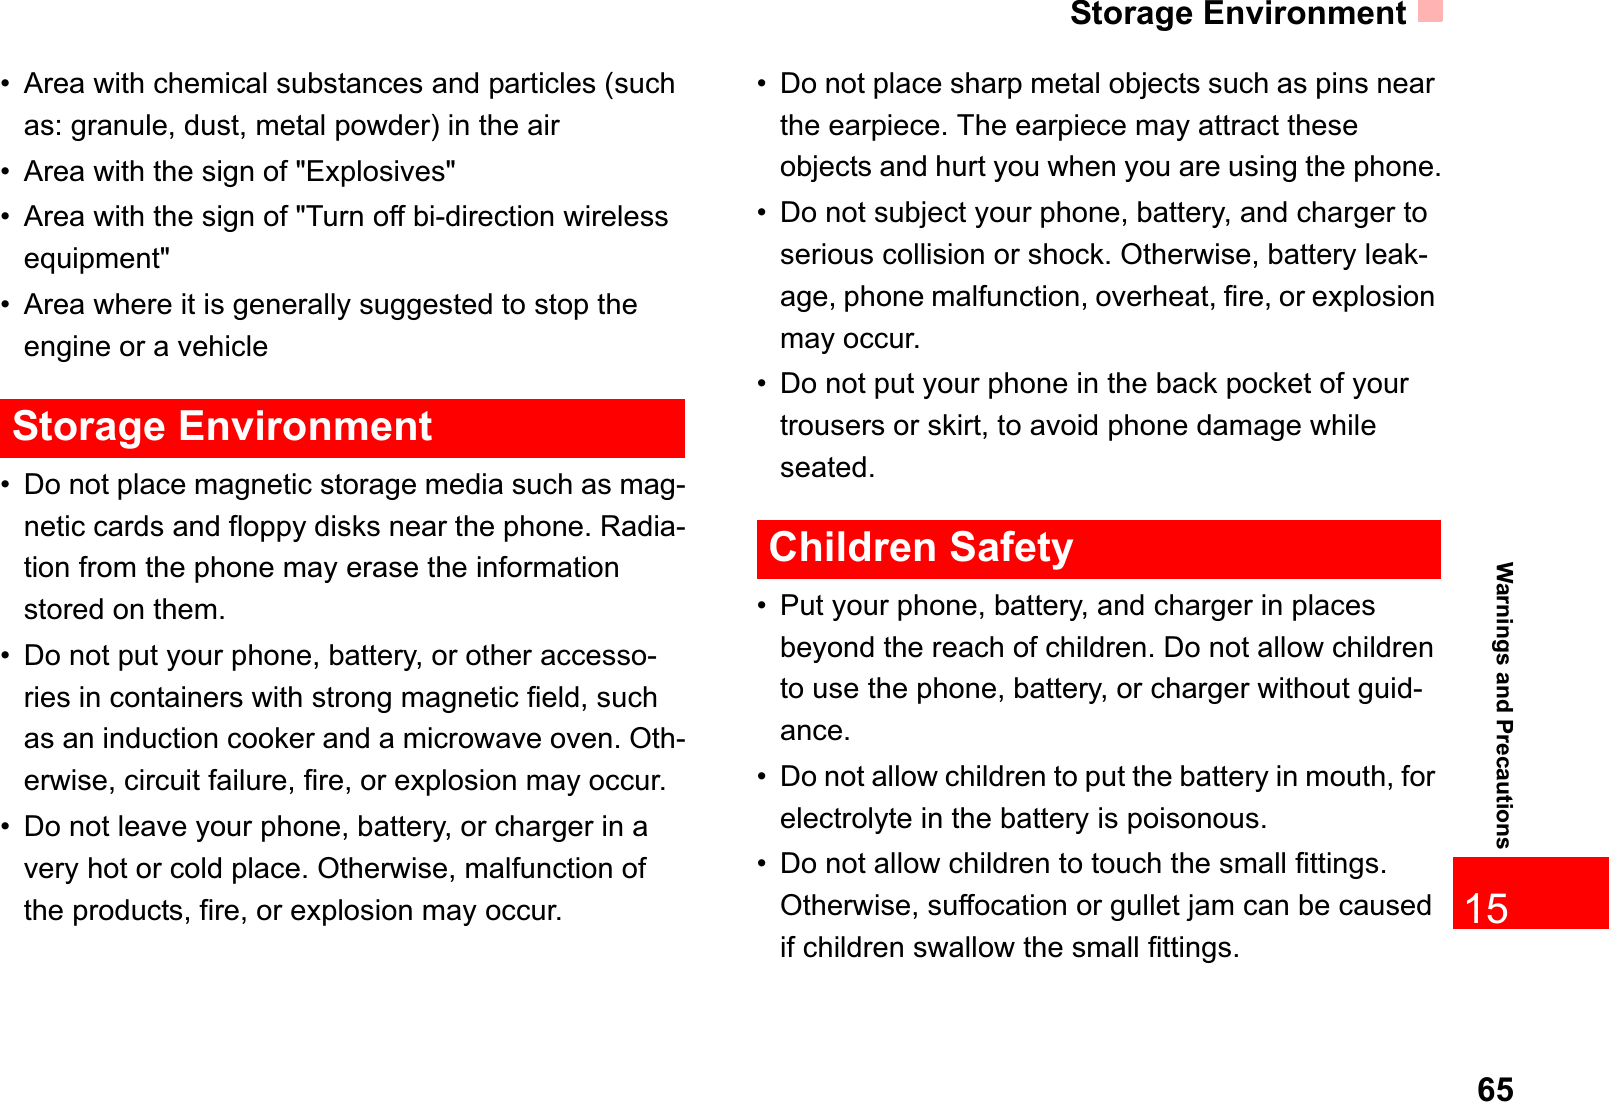 Storage Environment6515Warnings and Precautions• Area with chemical substances and particles (such as: granule, dust, metal powder) in the air• Area with the sign of &quot;Explosives&quot;• Area with the sign of &quot;Turn off bi-direction wireless equipment&quot;• Area where it is generally suggested to stop the engine or a vehicleStorage Environment• Do not place magnetic storage media such as mag-netic cards and floppy disks near the phone. Radia-tion from the phone may erase the information stored on them.• Do not put your phone, battery, or other accesso-ries in containers with strong magnetic field, such as an induction cooker and a microwave oven. Oth-erwise, circuit failure, fire, or explosion may occur.• Do not leave your phone, battery, or charger in a very hot or cold place. Otherwise, malfunction of the products, fire, or explosion may occur.• Do not place sharp metal objects such as pins near the earpiece. The earpiece may attract these objects and hurt you when you are using the phone.• Do not subject your phone, battery, and charger to serious collision or shock. Otherwise, battery leak-age, phone malfunction, overheat, fire, or explosion may occur.• Do not put your phone in the back pocket of your trousers or skirt, to avoid phone damage while seated.Children Safety• Put your phone, battery, and charger in places beyond the reach of children. Do not allow children to use the phone, battery, or charger without guid-ance.• Do not allow children to put the battery in mouth, for electrolyte in the battery is poisonous.• Do not allow children to touch the small fittings. Otherwise, suffocation or gullet jam can be caused if children swallow the small fittings.